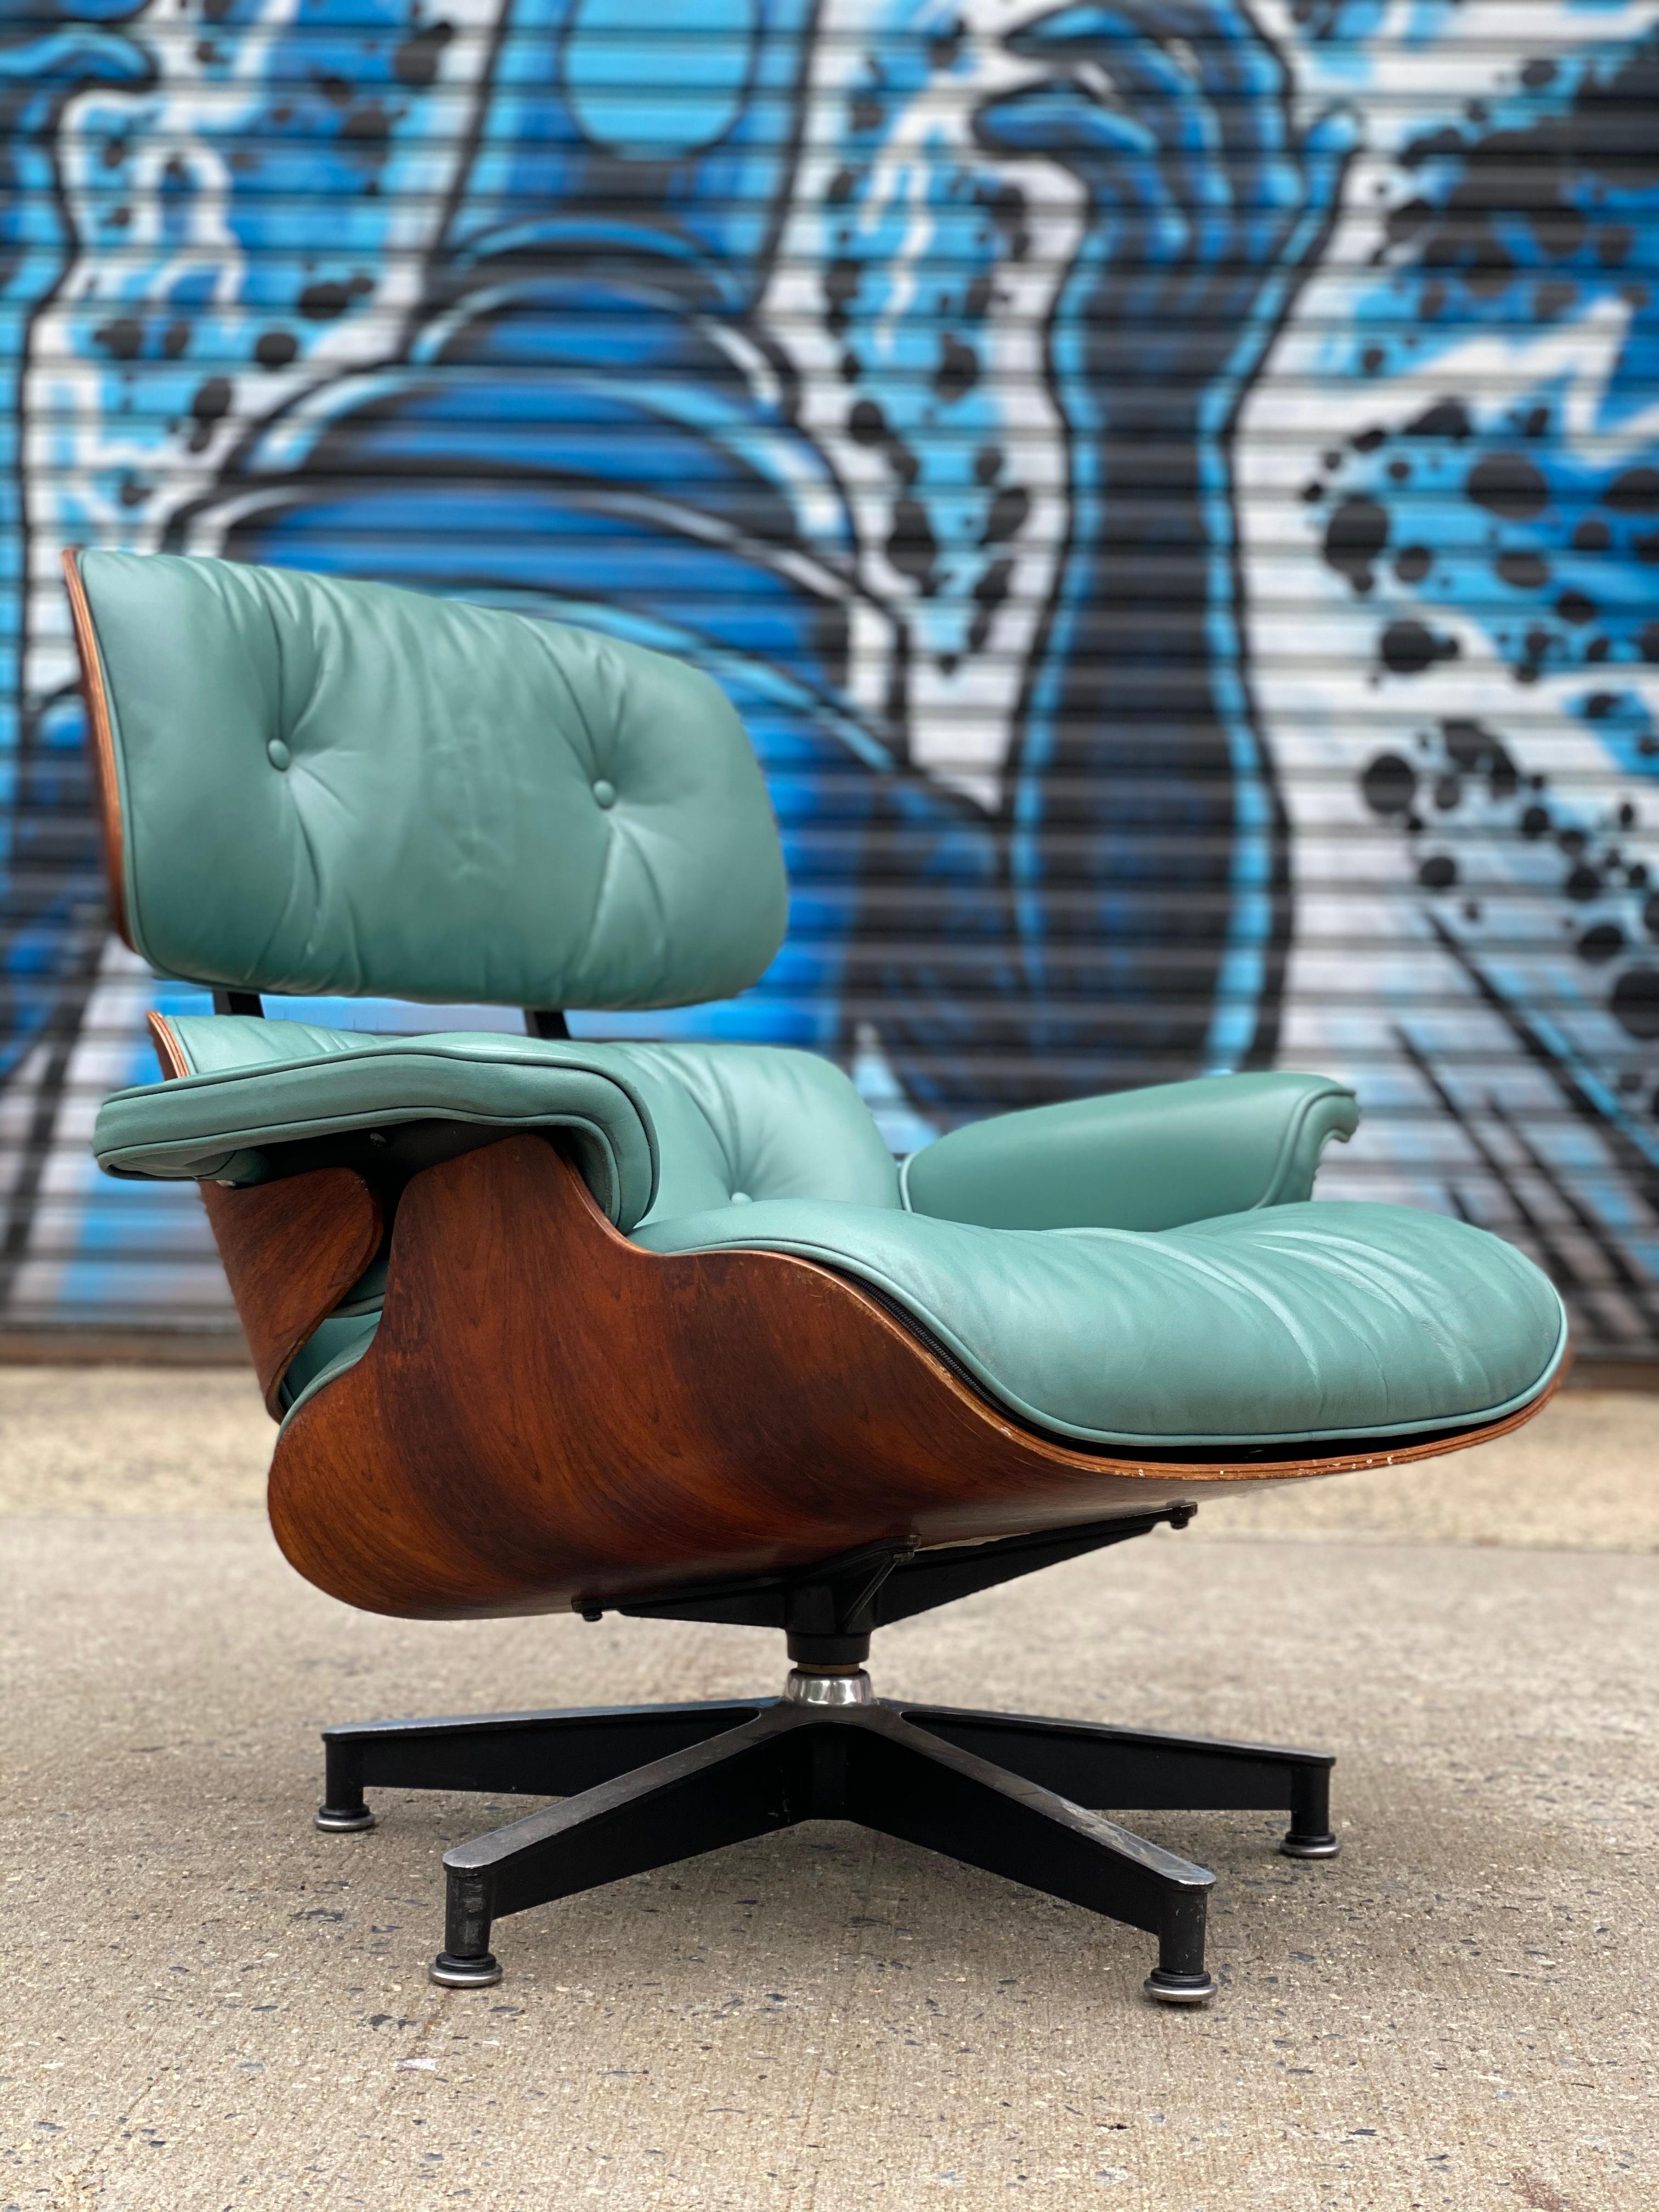 Incredibly vibrant and elegant edition of the Classic Herman Miller Eames lounge chair and ottoman, circa 1970s chair with original Herman Miller label. Custom leather cushions in superb condition. This shade is not a color we have ever come across